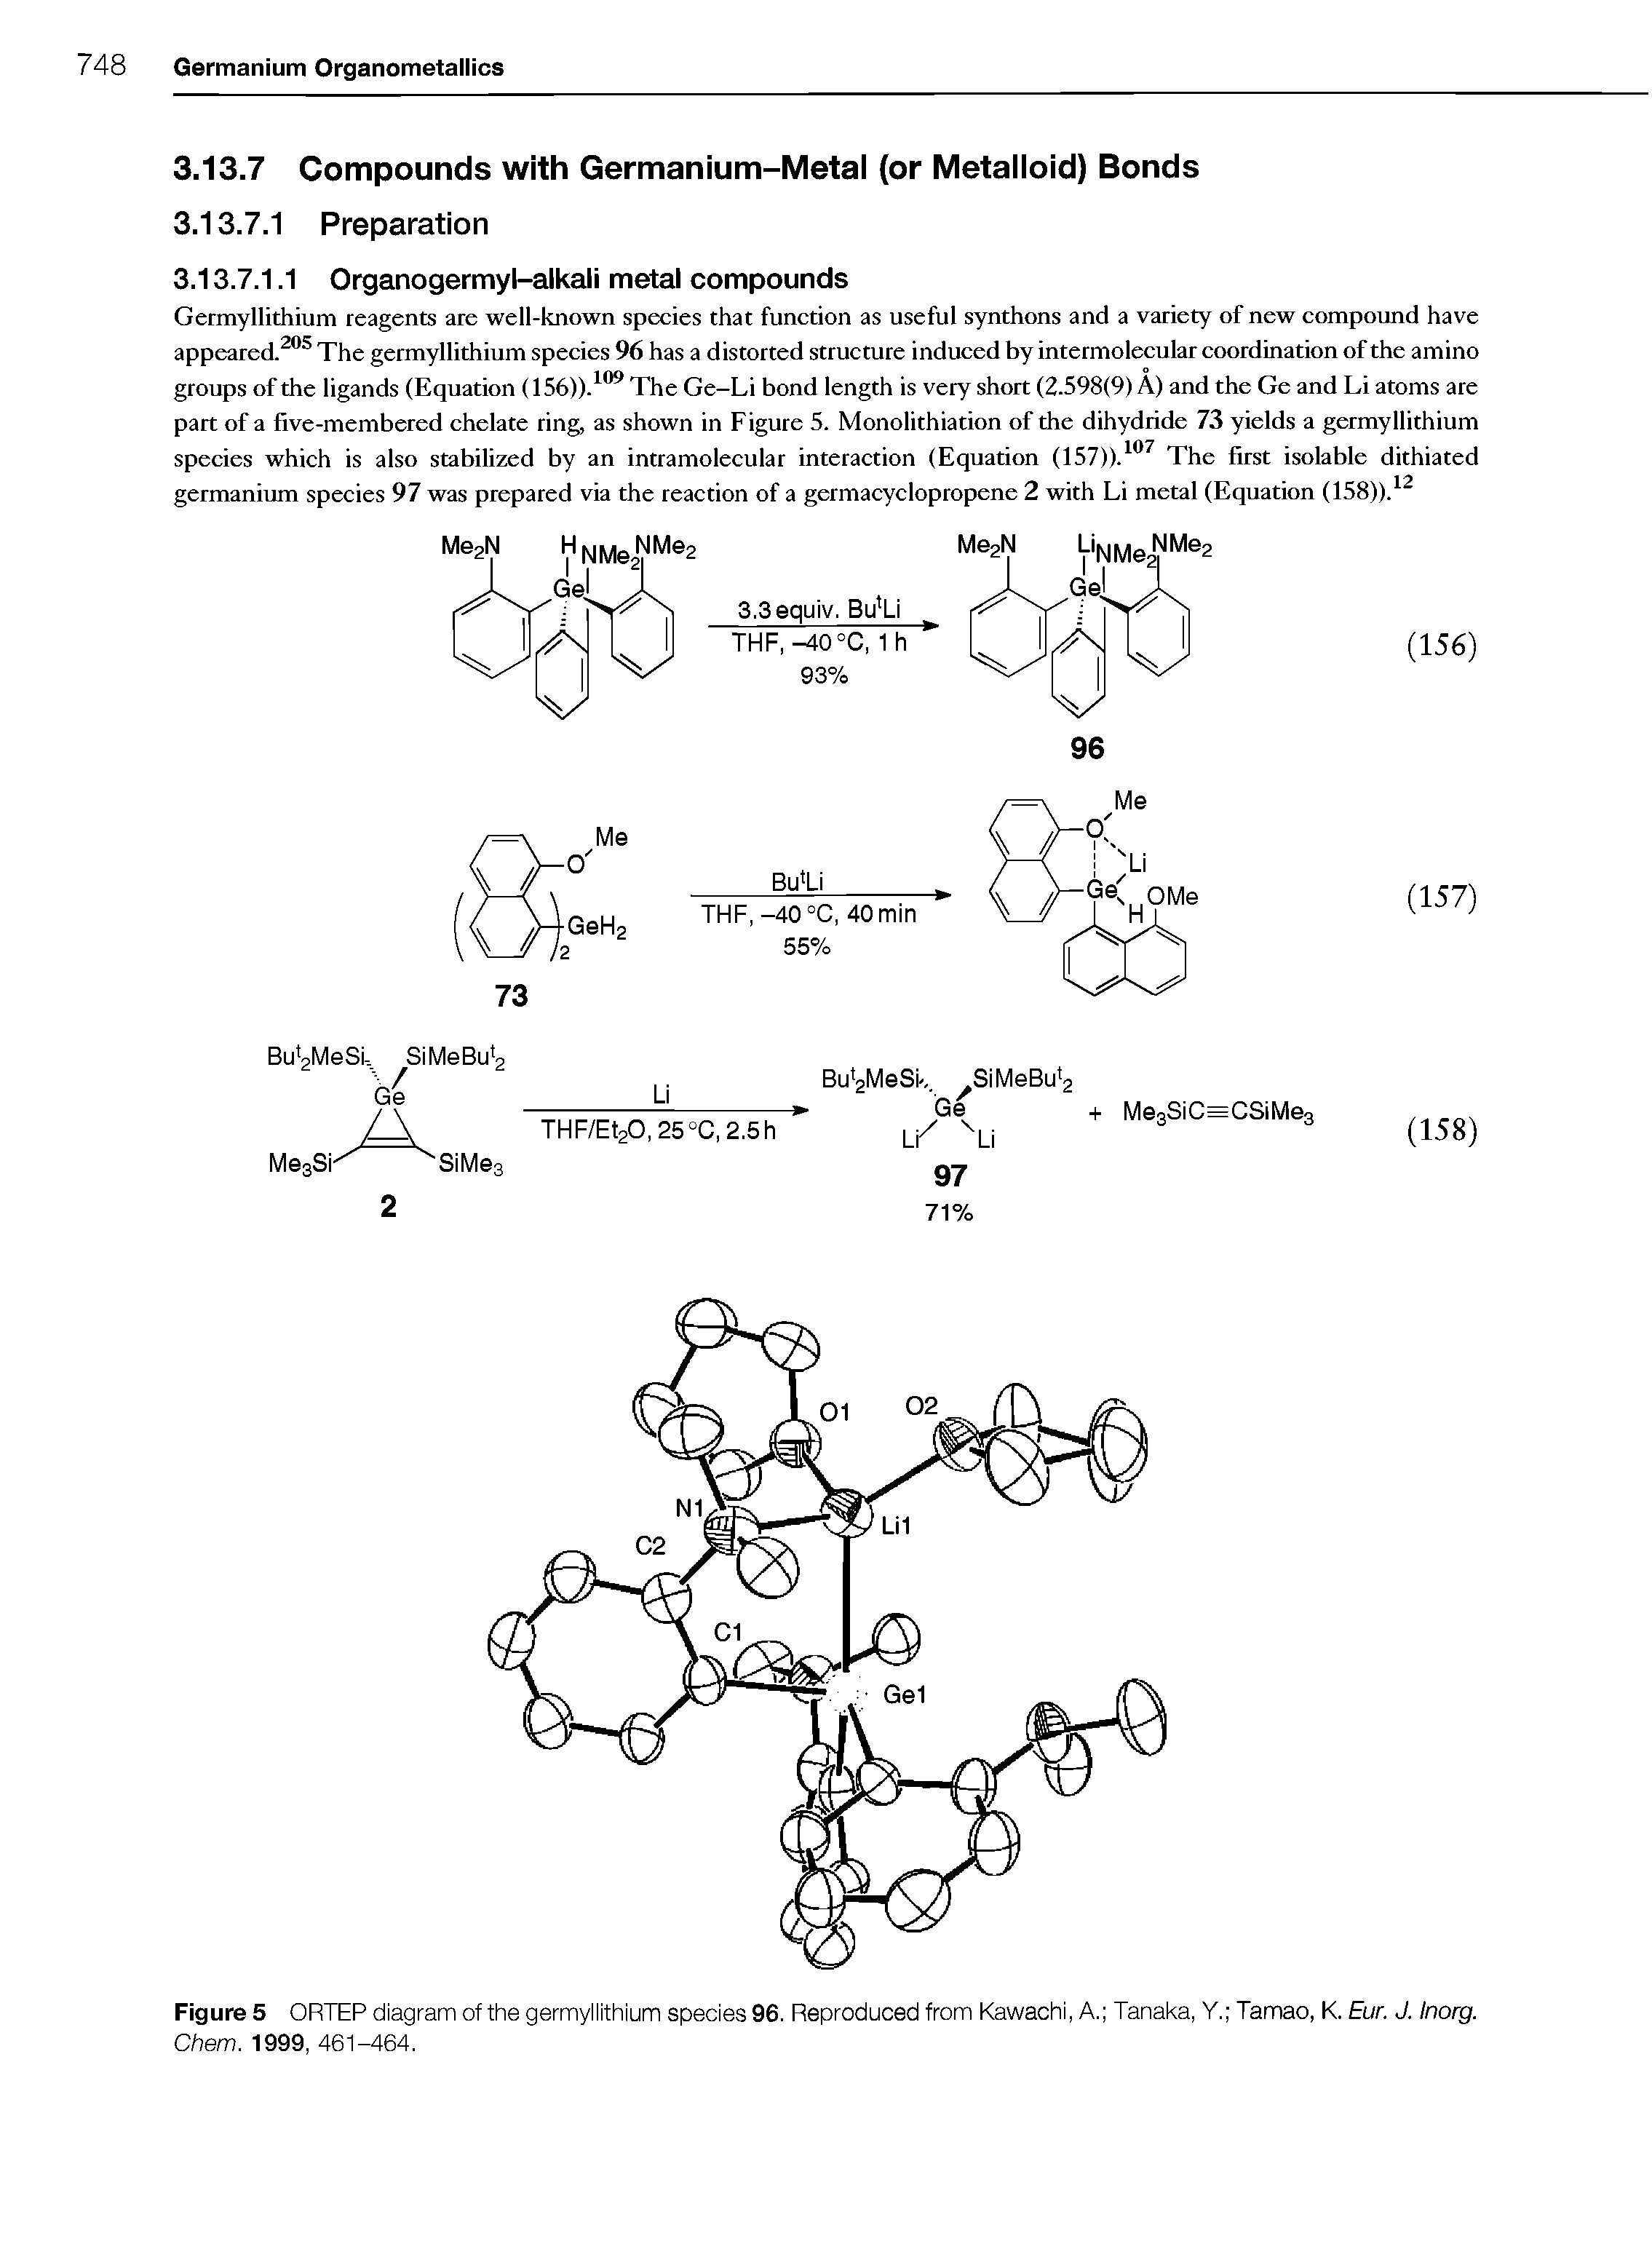 Figure 5 ORTEP diagram of the germyllithium species 96. Reproduced from Kawachi, A. Tanaka, Y. Tamao, K. Eur. J. Inorg. Chem. 1999, 461-464.